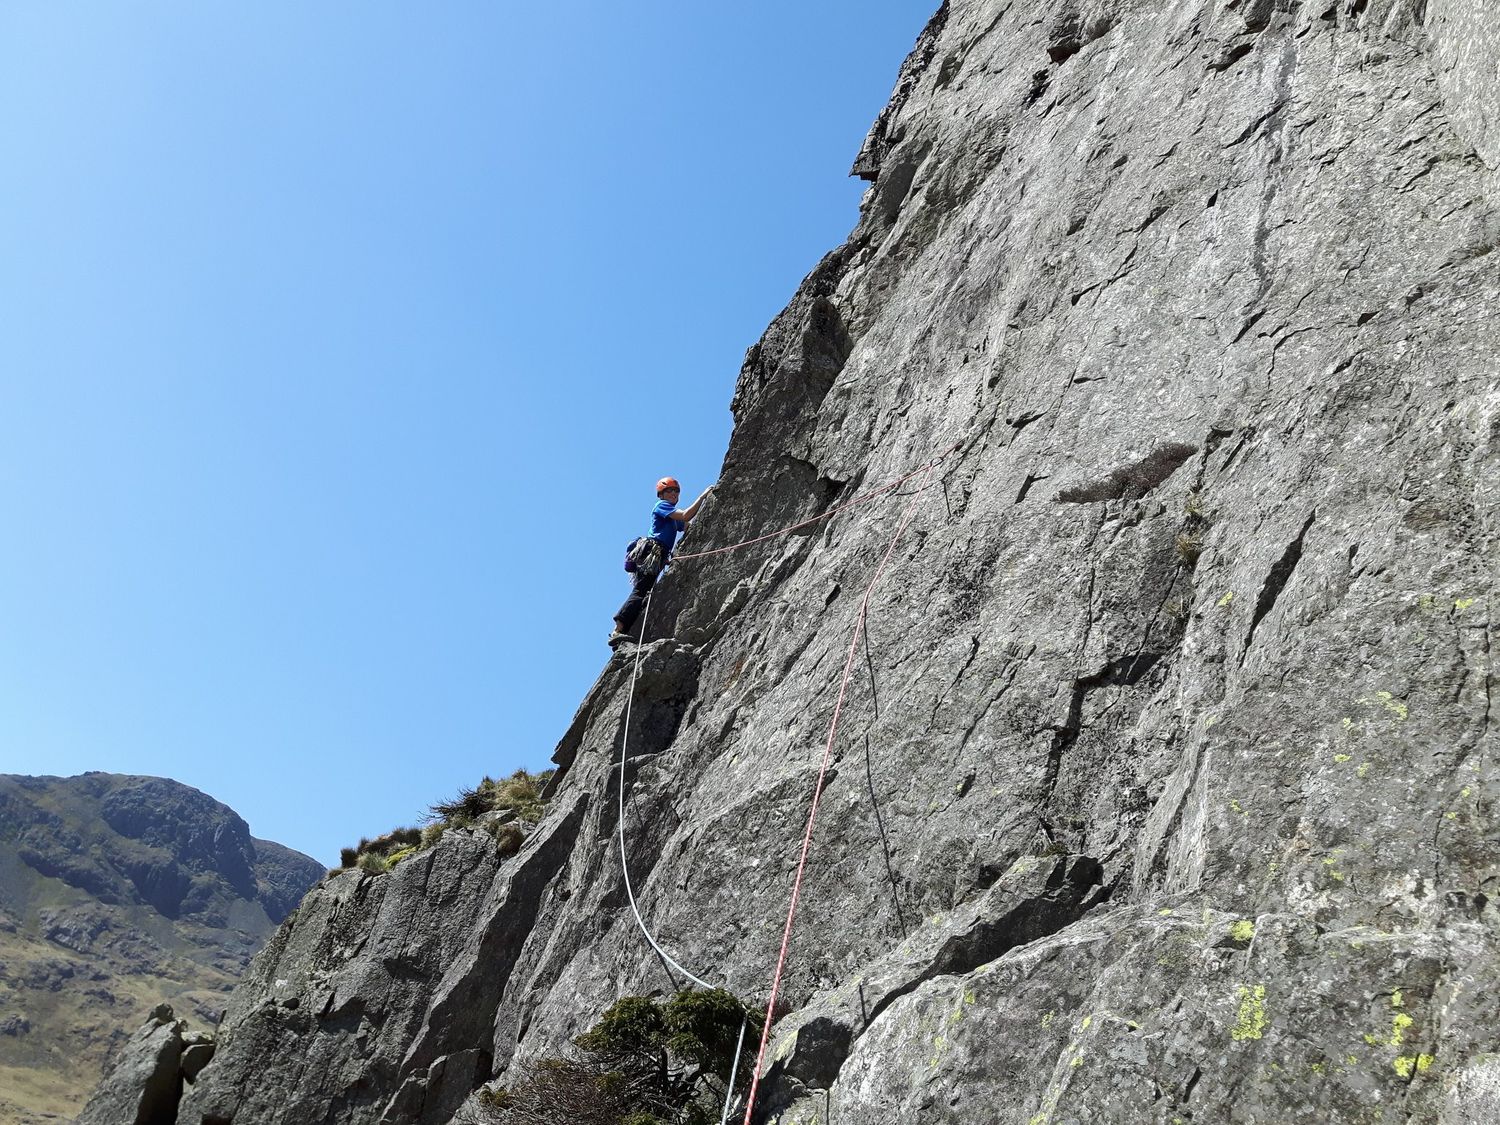  Leading a multi pitch climb in the Lake District - Chris Ensoll Mountain Guide 